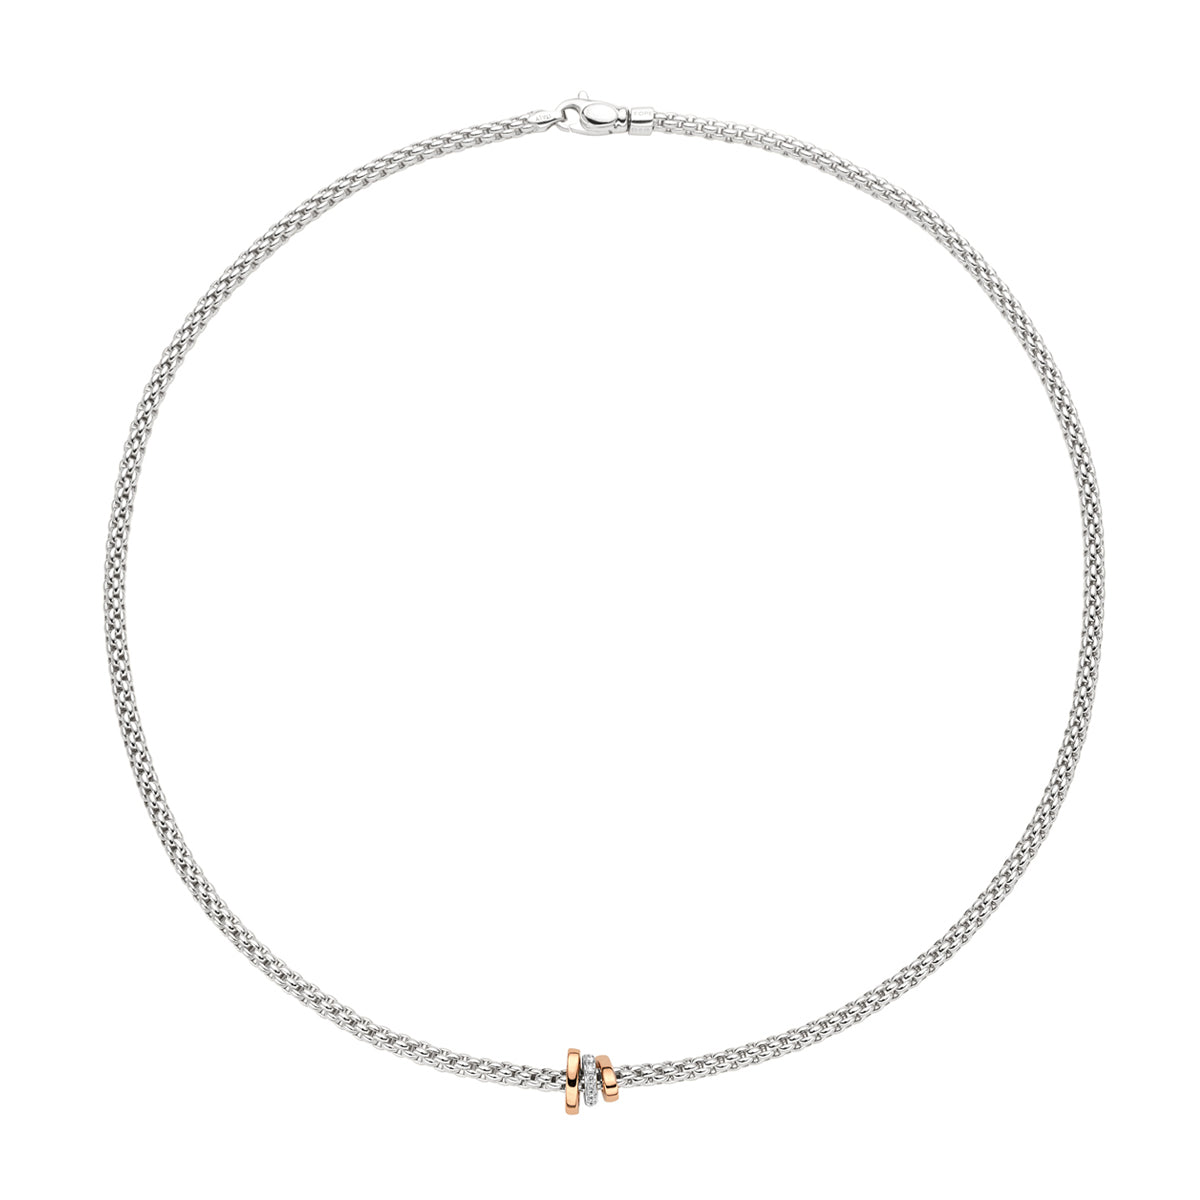 Prima 18ct White Gold Necklace With Multi-Tone Diamond Set And Plain Rondels